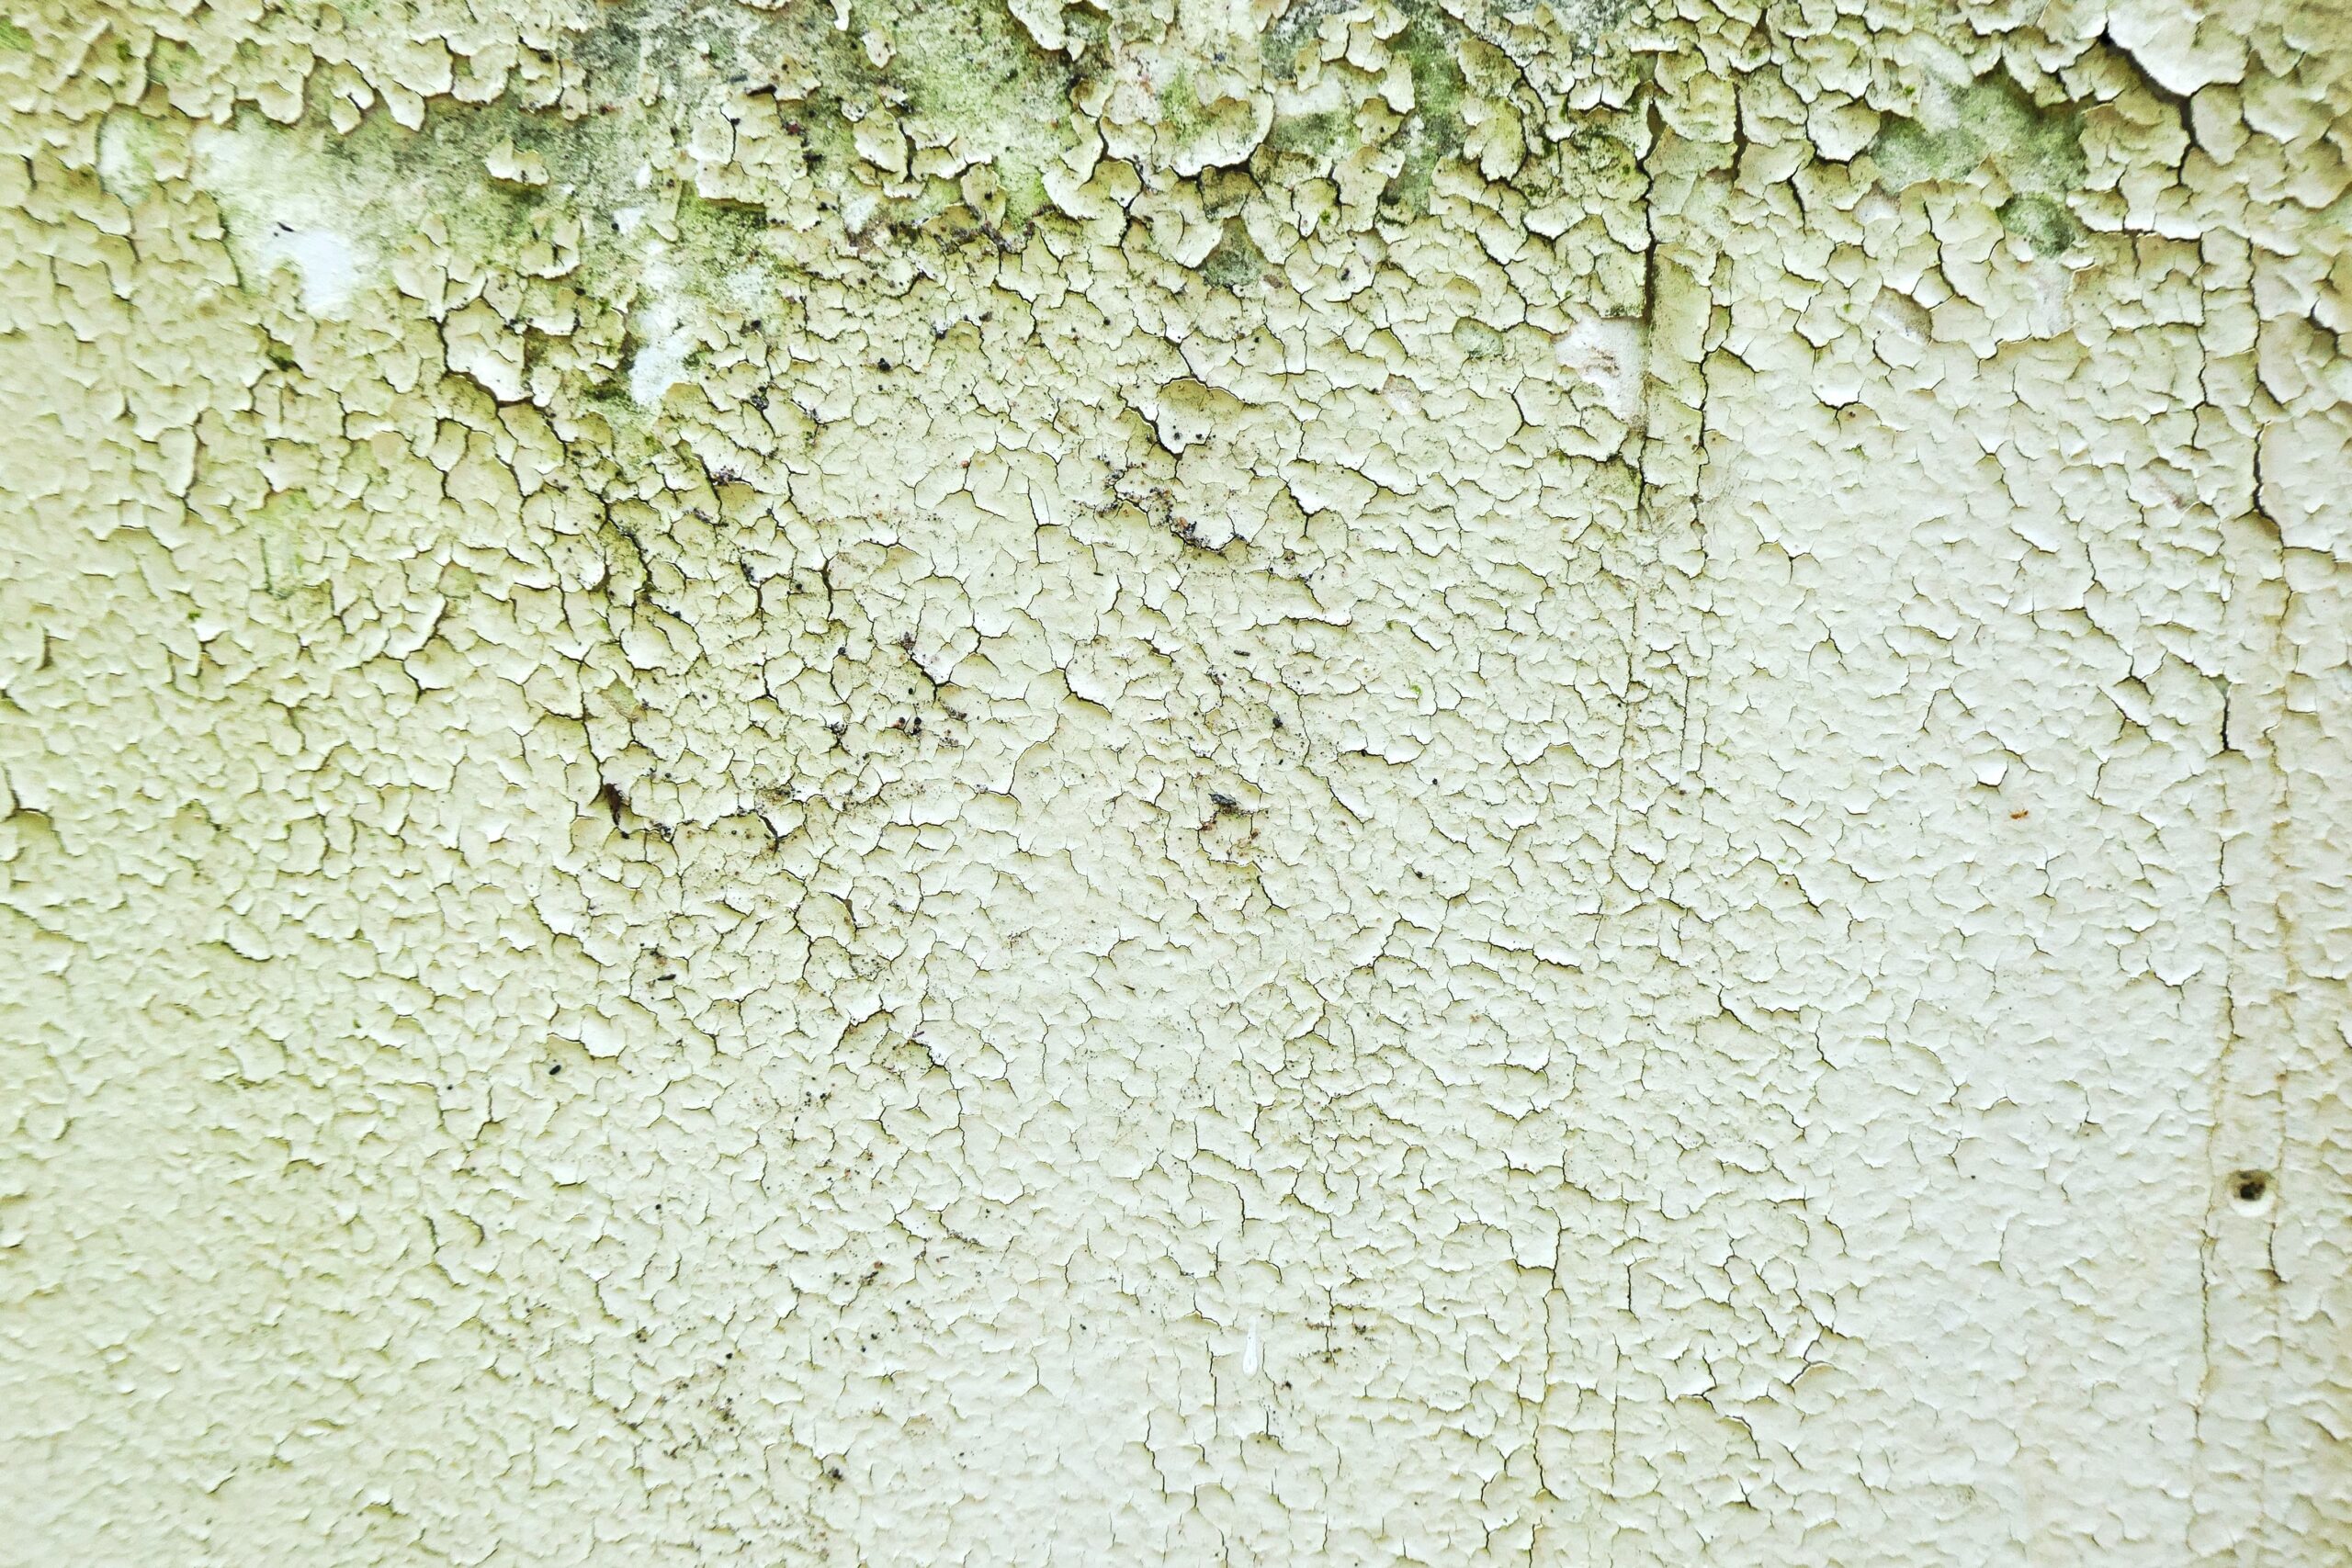 How Long Does It Take to Get Rid of Mold?